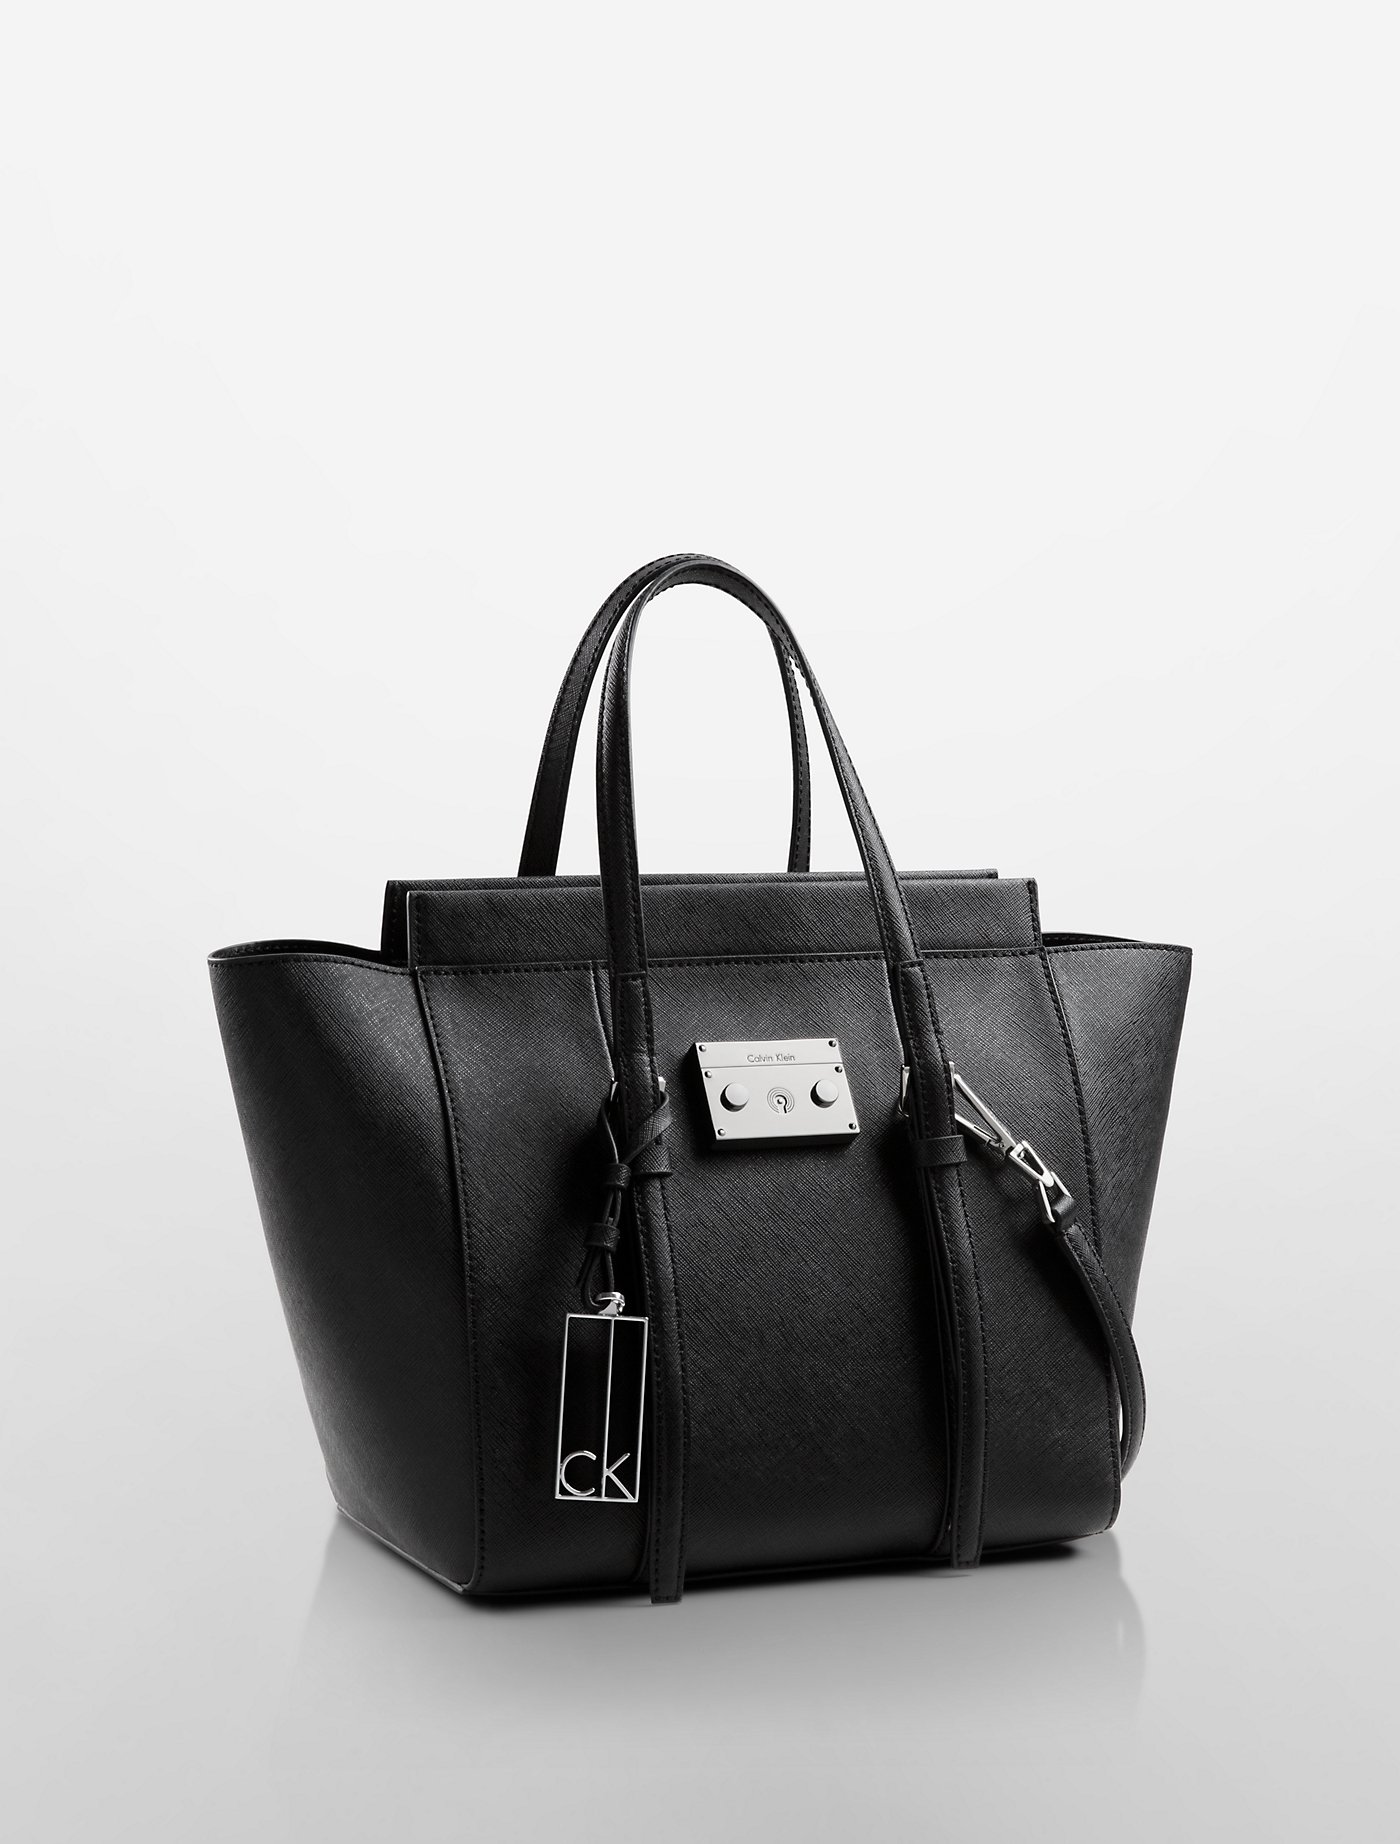 galey saffiano leather city winged shopper tote | Klein